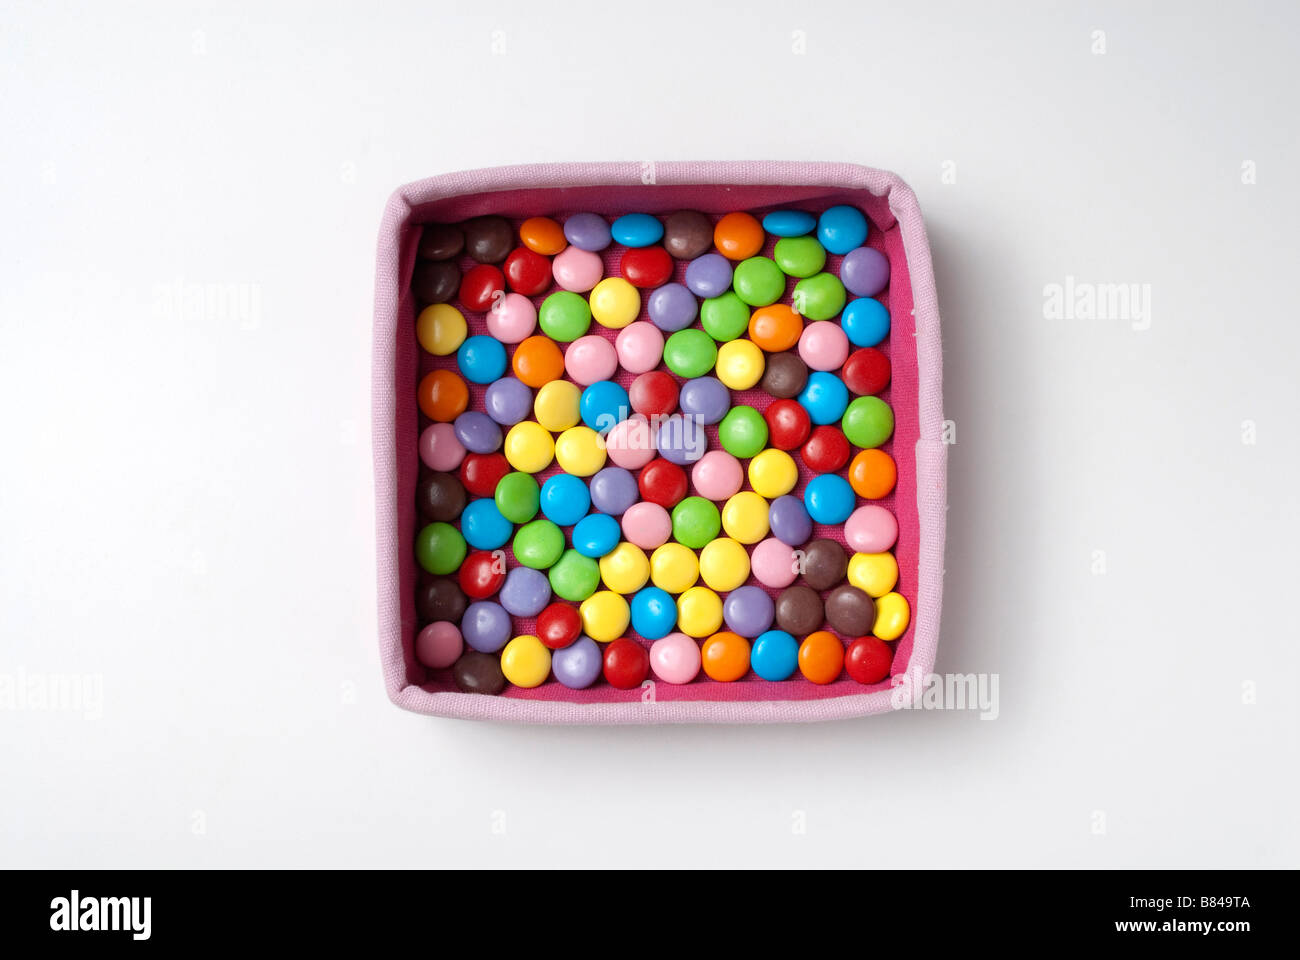 Smarties sweets in Pink box Stock Photo